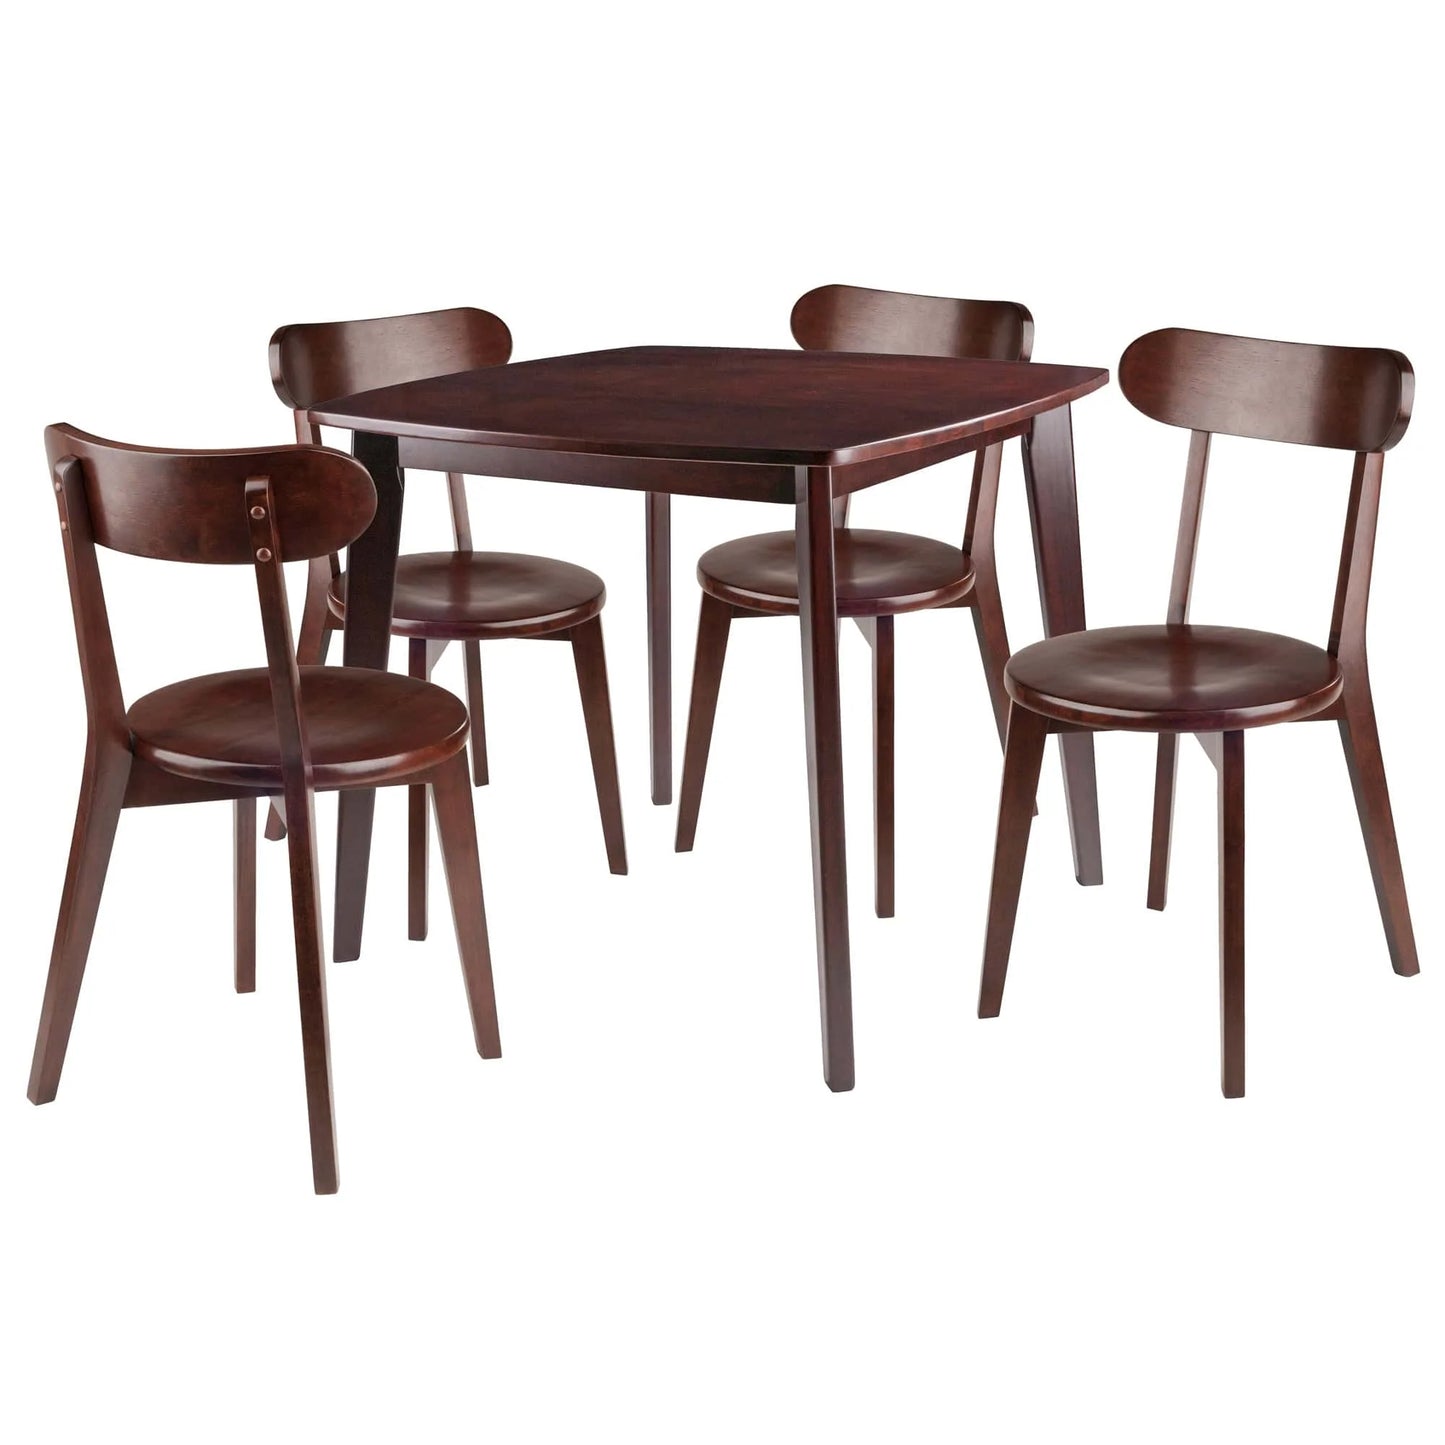 WINSOME Pub Table Set Pauline 5-Pc Dining Table with H-Leg Chairs, Walnut